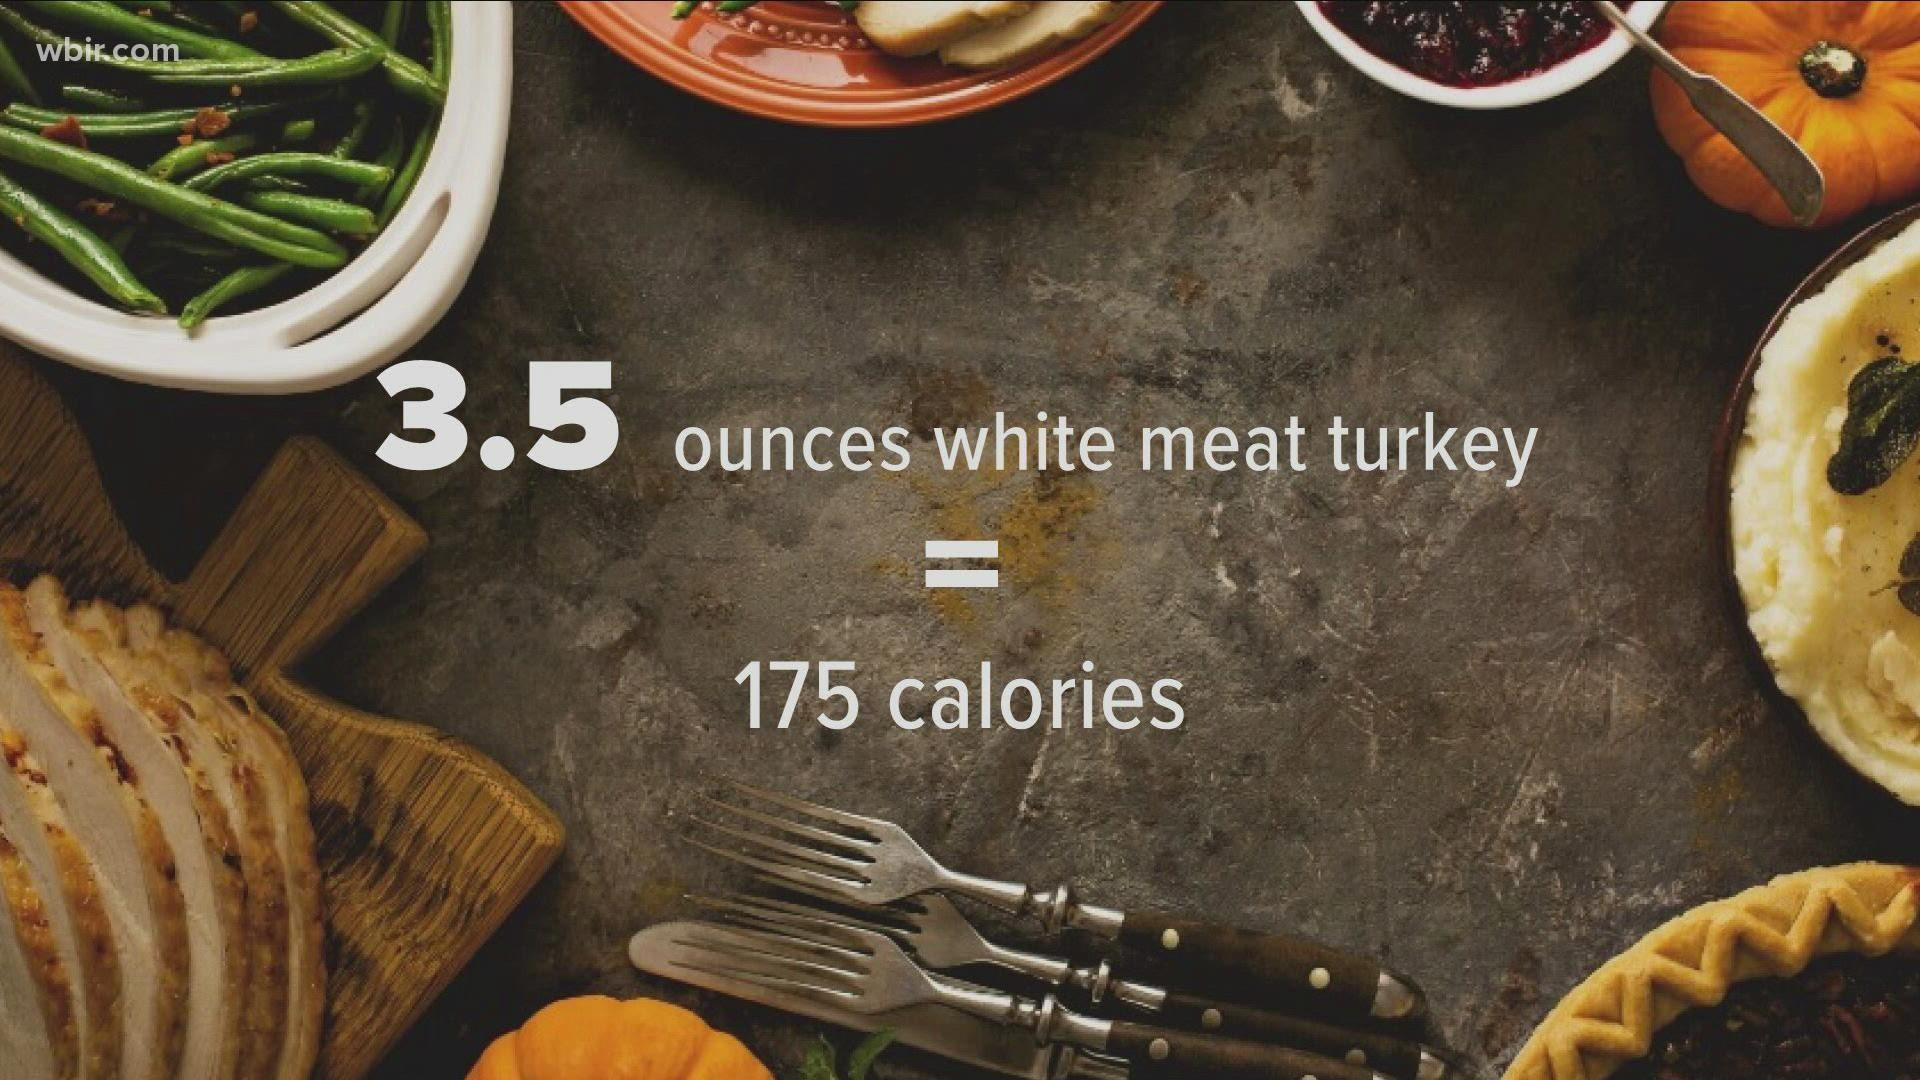 A typical holiday dinner of mashed potatoes, turkey and stuffing can carry a load of 3,000 calories — 1,000 more than the daily recommended intake for most people.